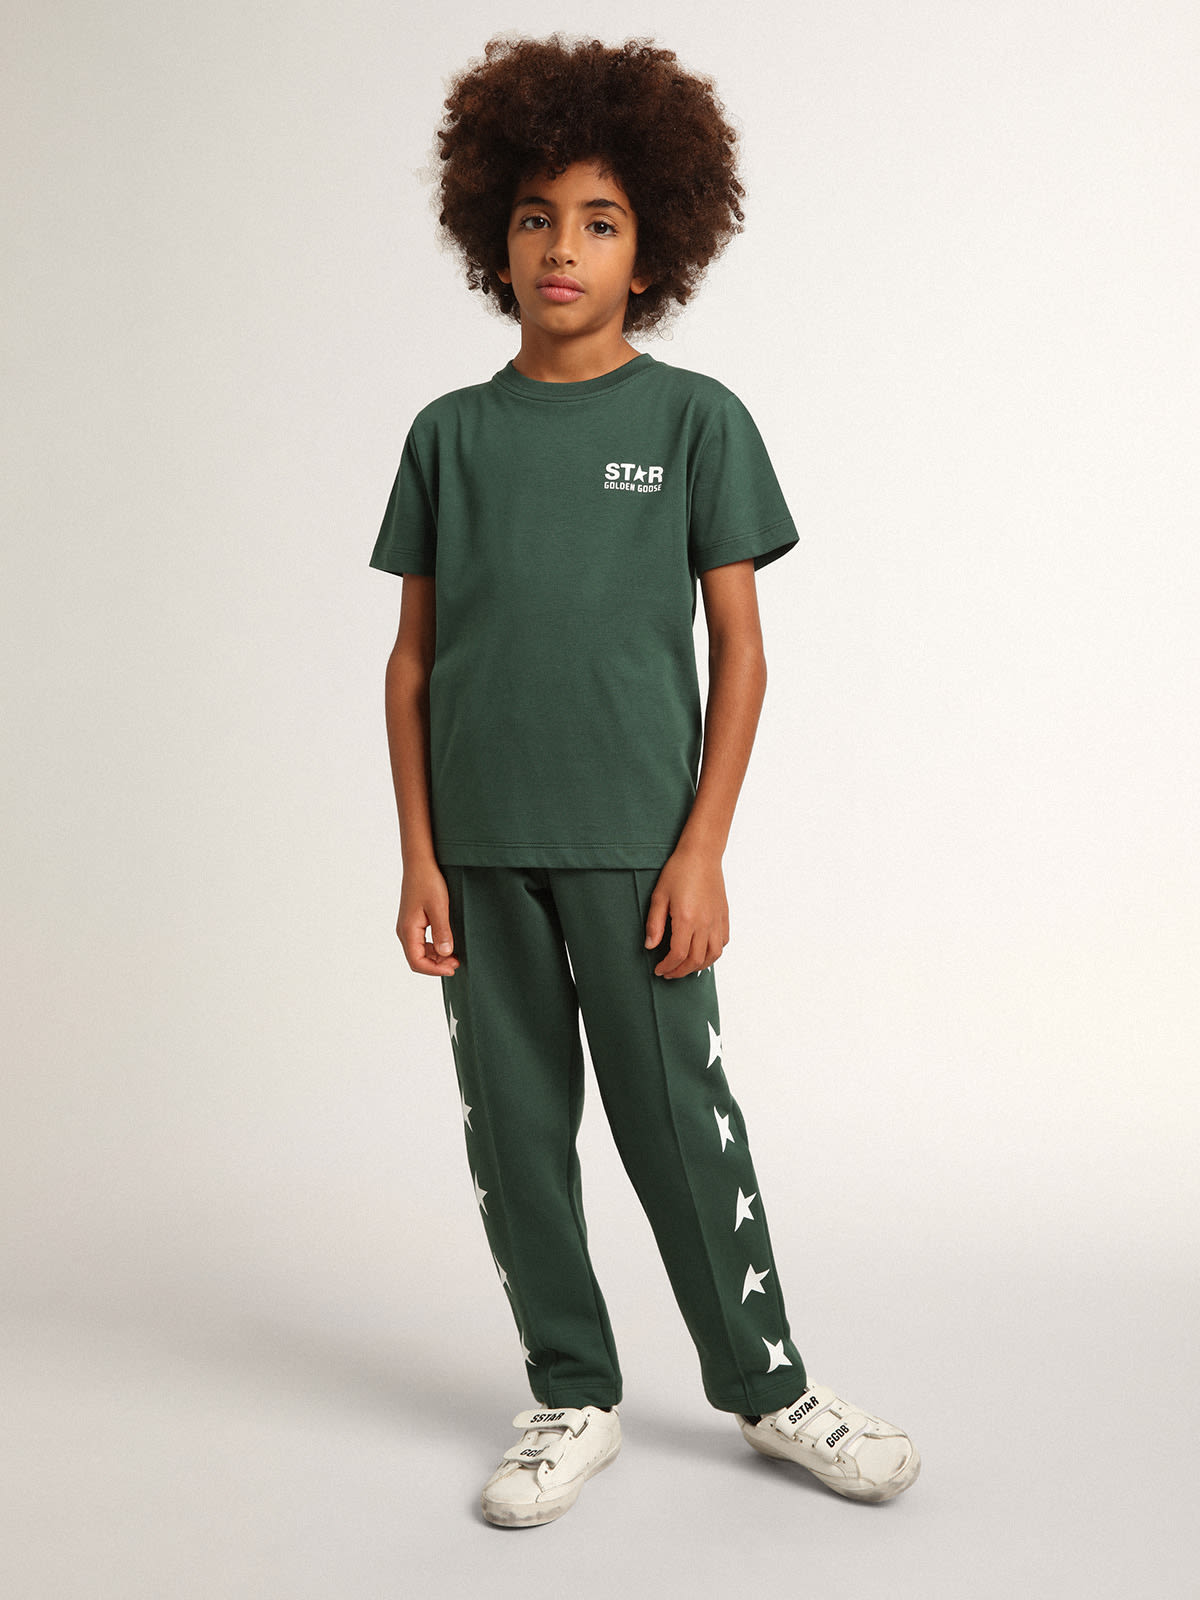 Golden Goose - Bright-green Star Collection jogging pants with contrasting white stars in 